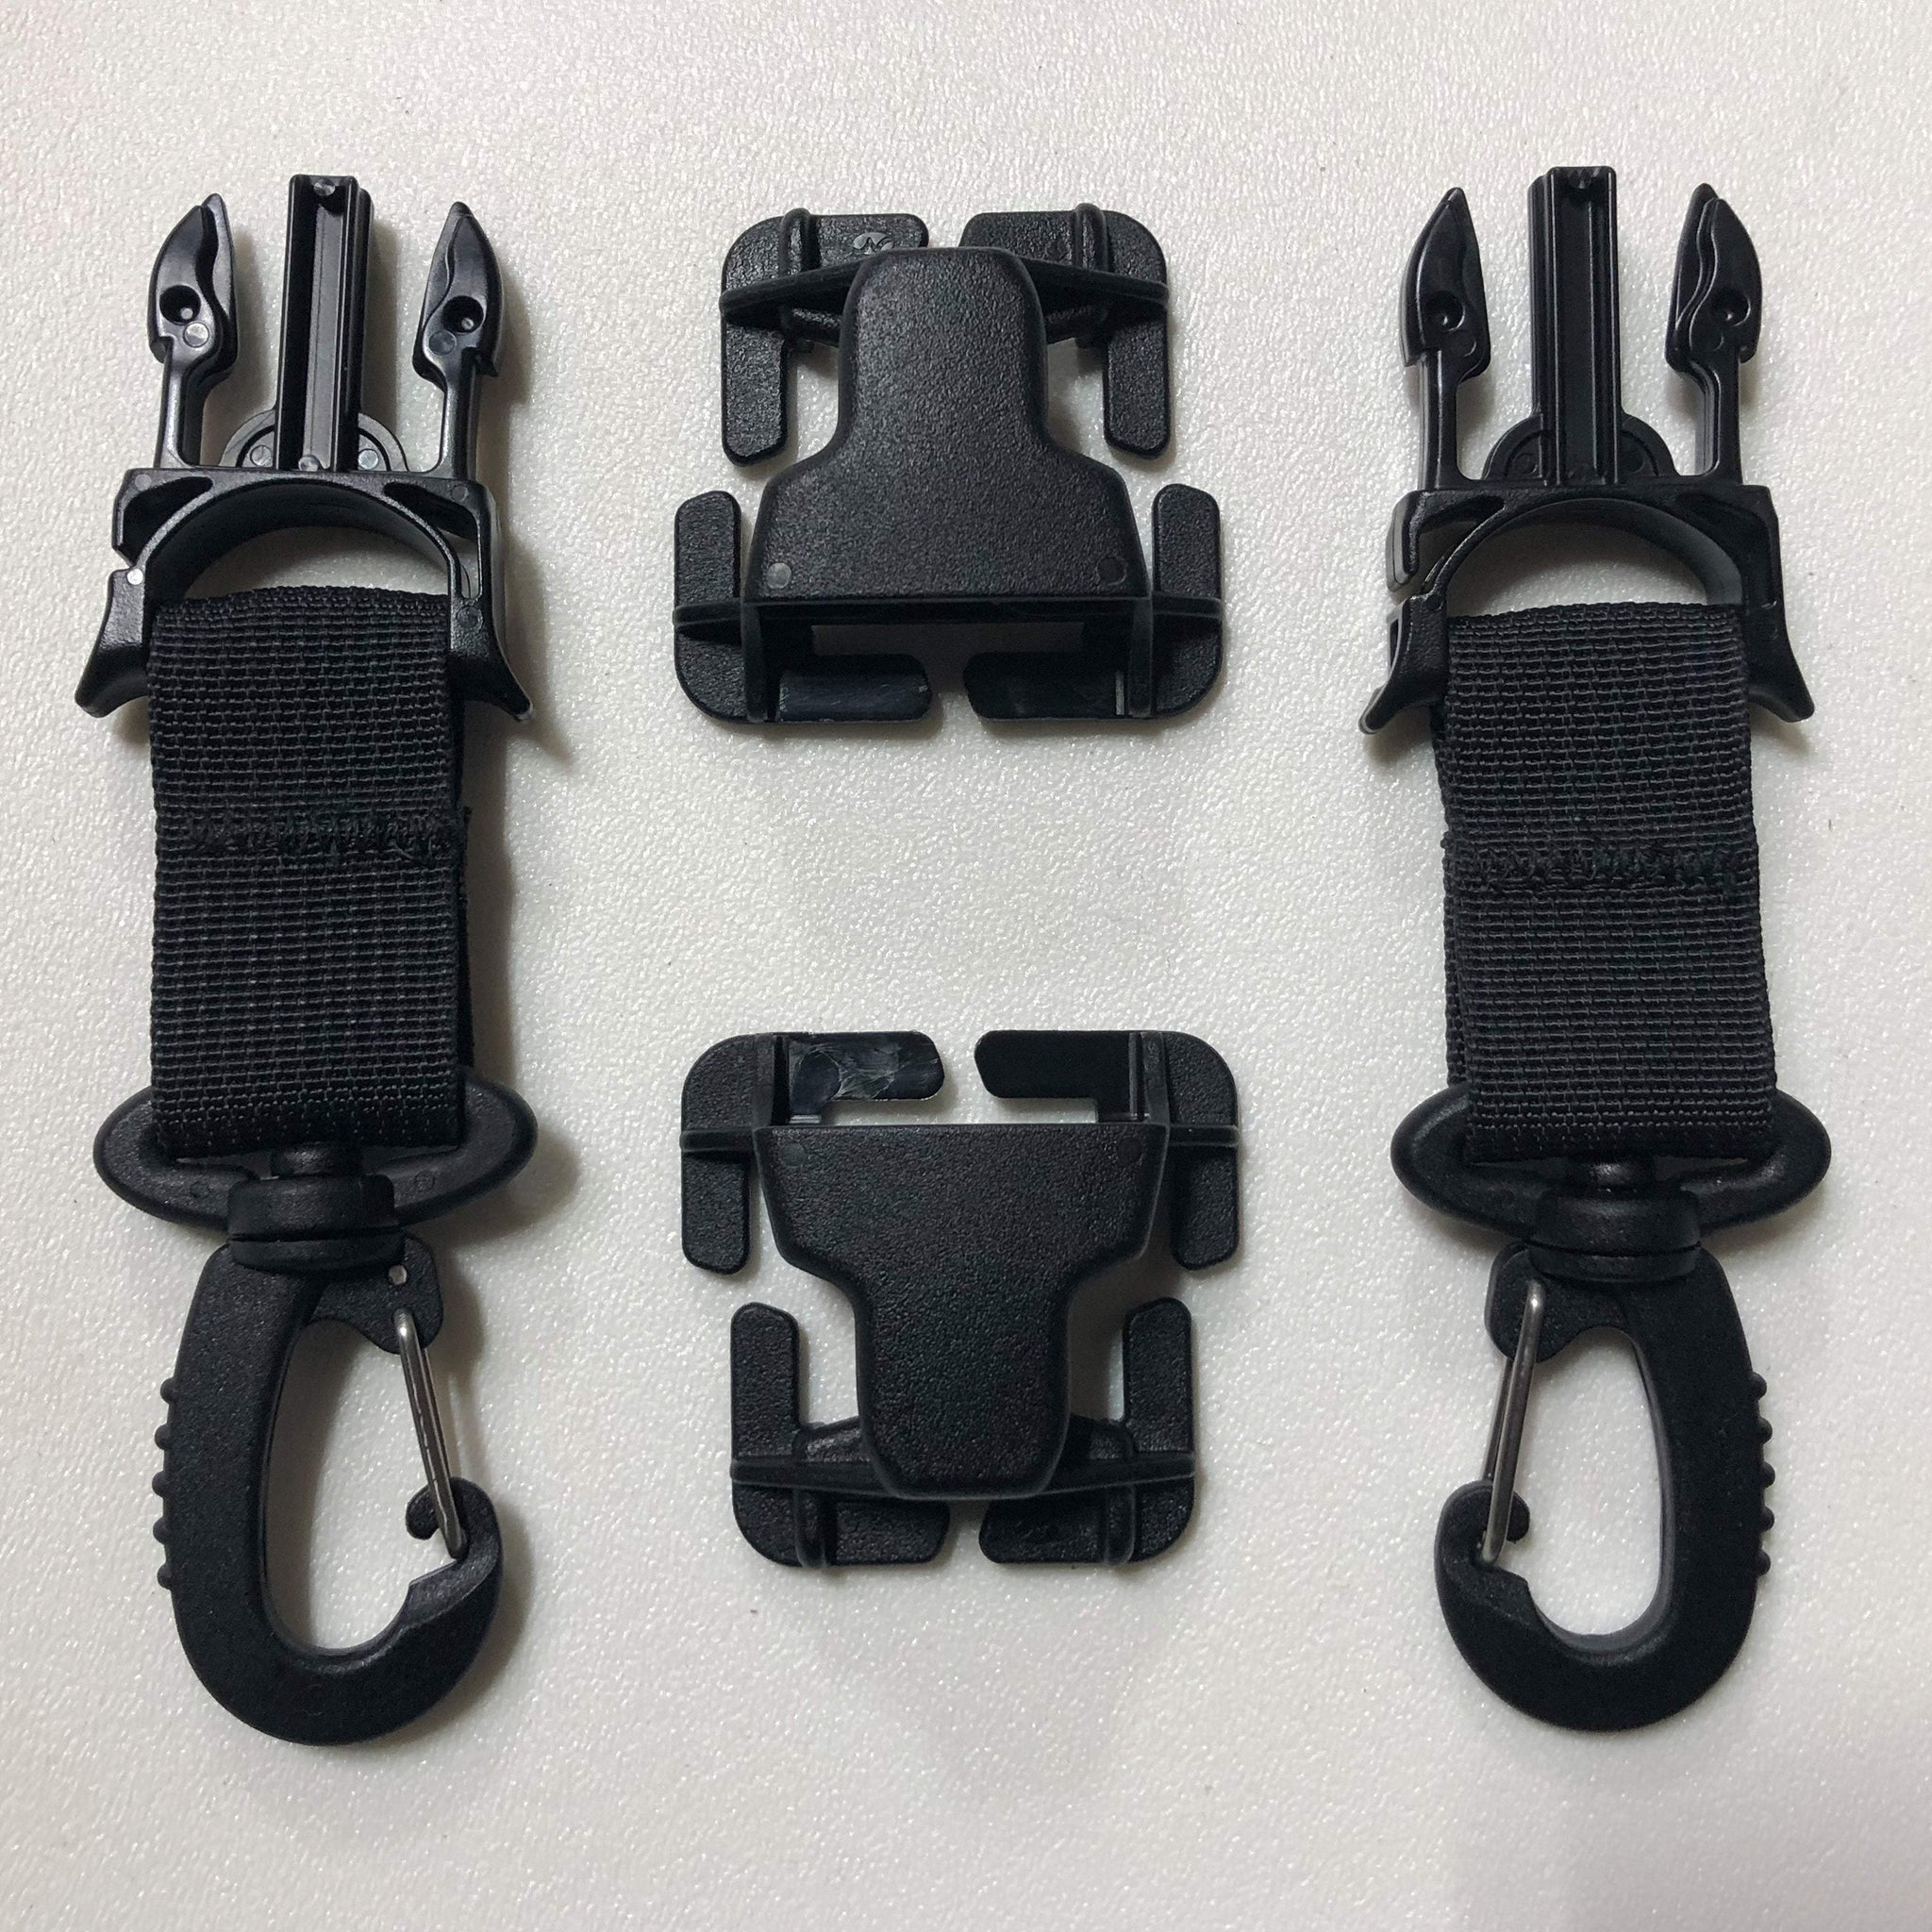 Molle Attachments by Bartact - PALS/MOLLE Acetal Heavy Duty Swivel Hook Every which Way Quick Side Release Buckle Kit (Pair of 2) - Black